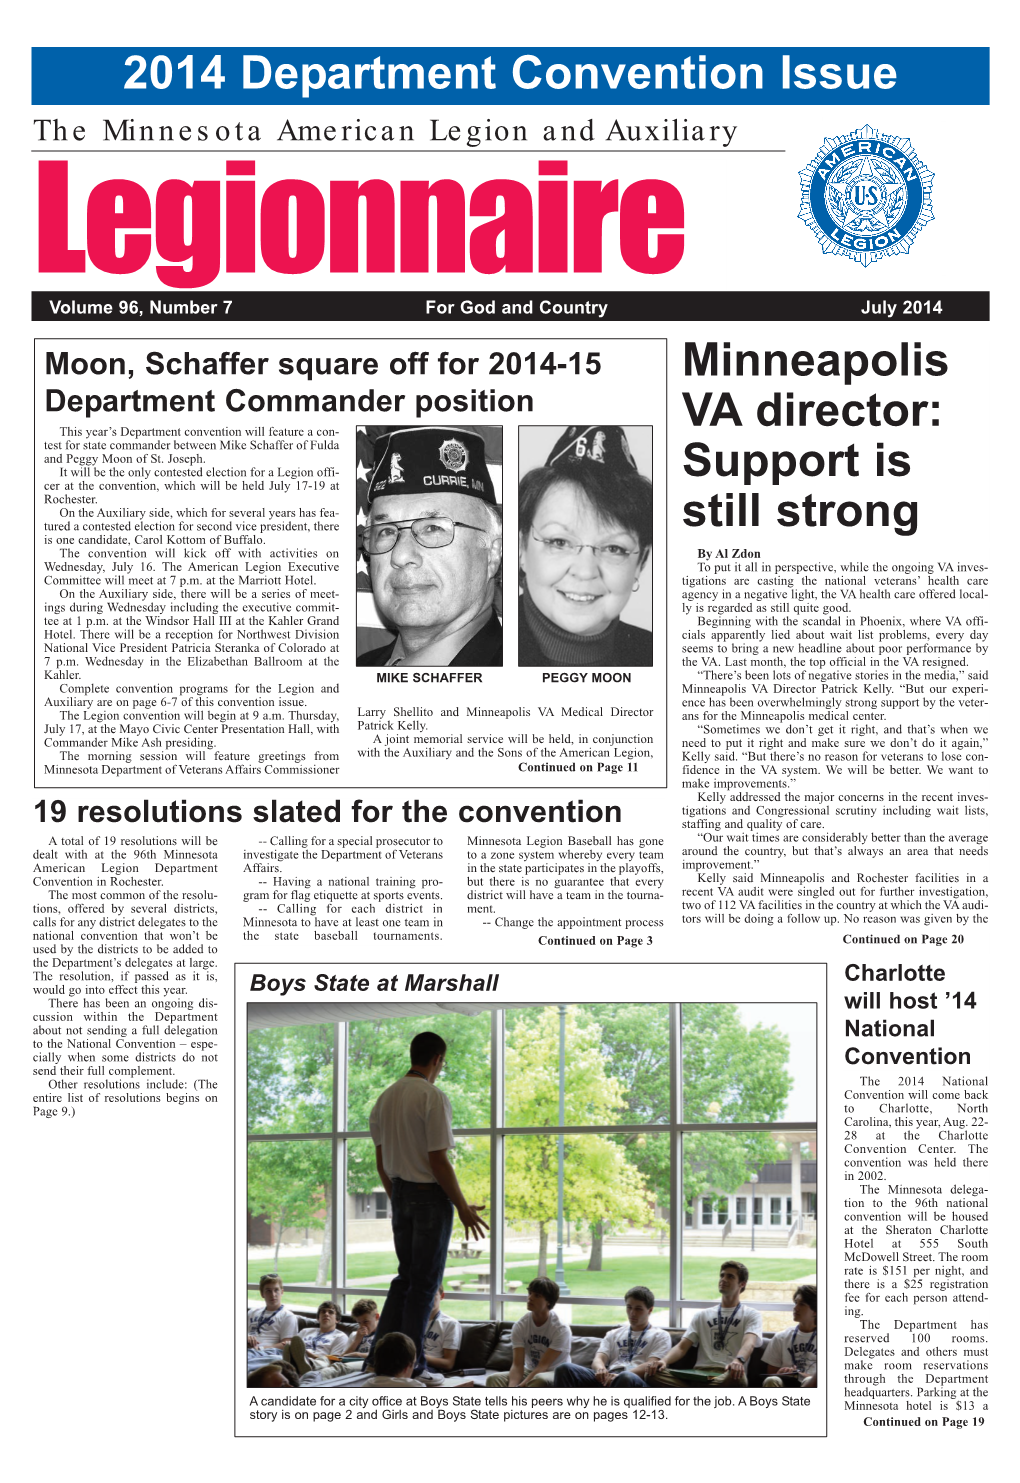 2014 Department Convention Issue the Minnesota American Legion and Auxiliary